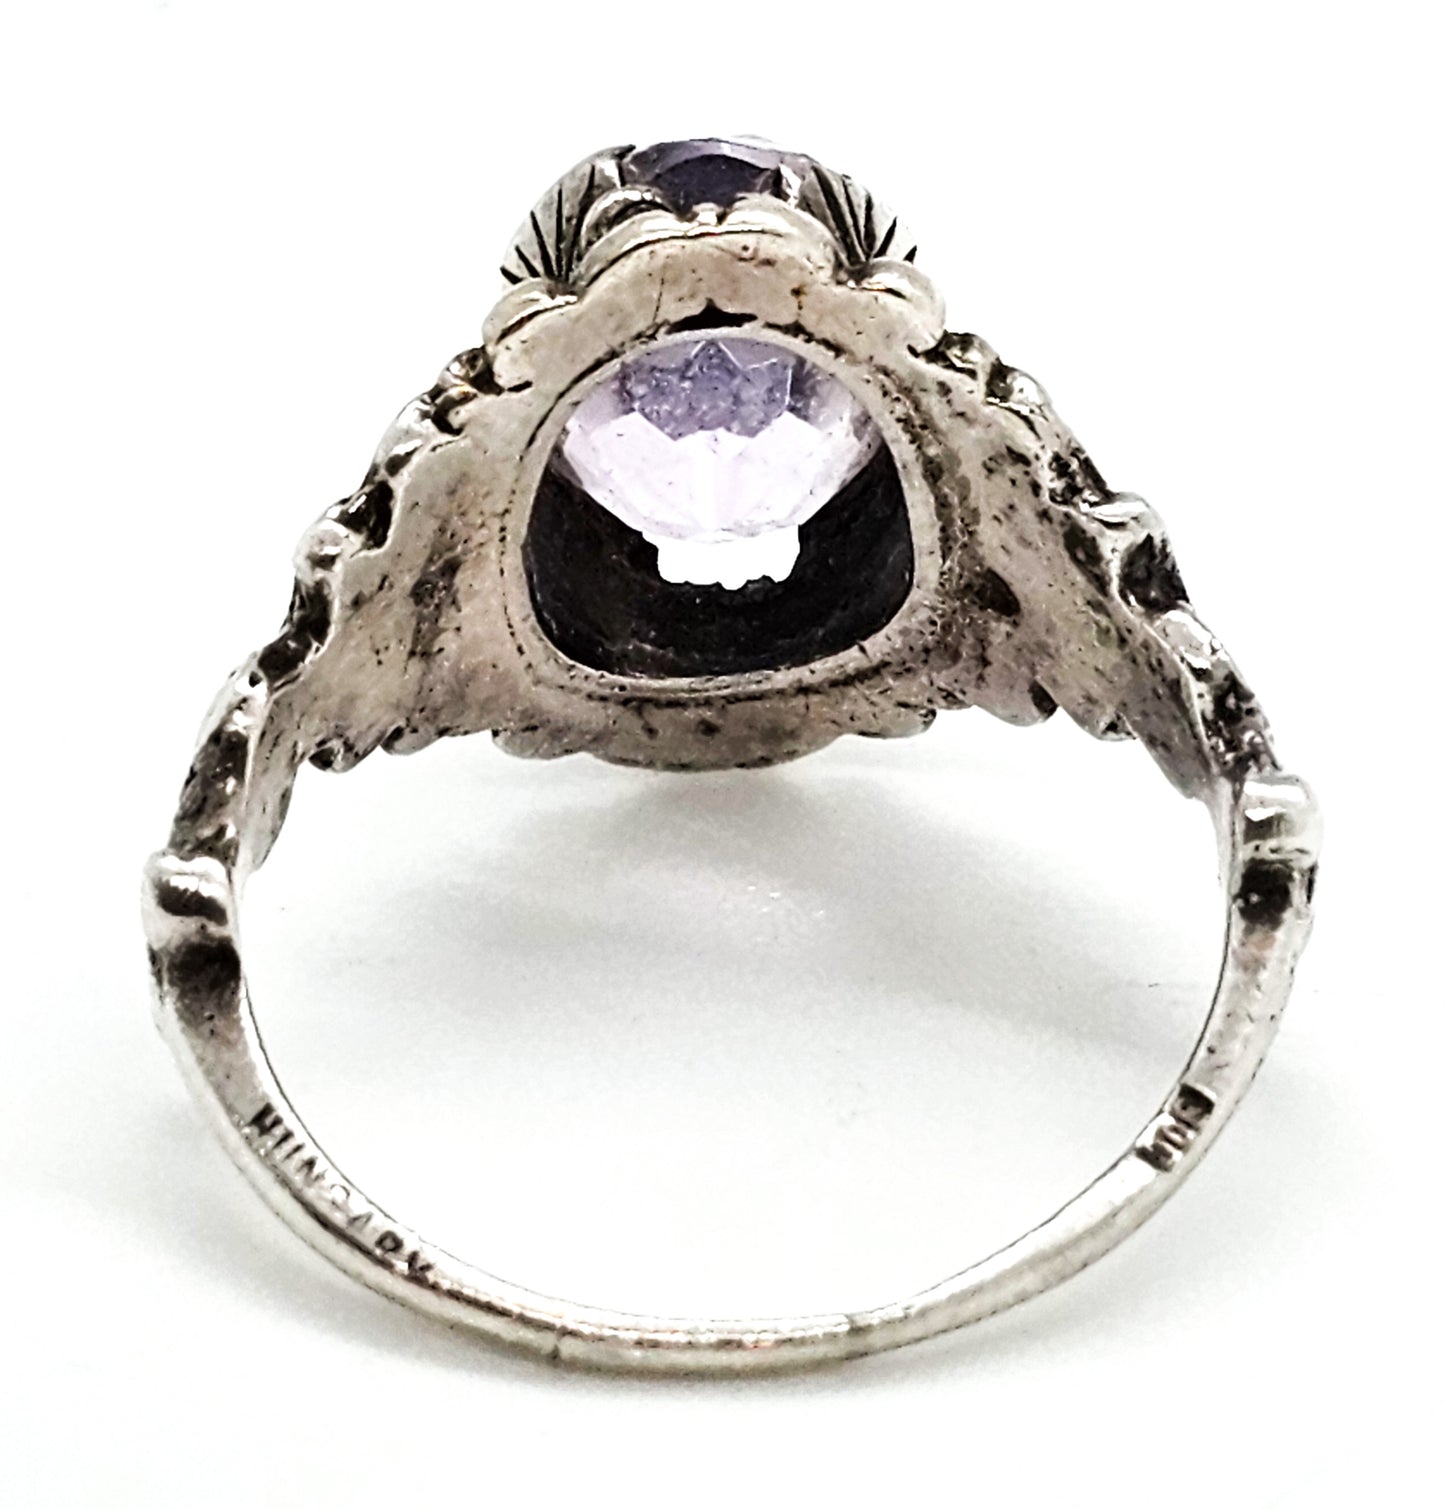 Astro Hungarian Arts and Crafts 2.66ct amethyst antique sterling silver ring size 8